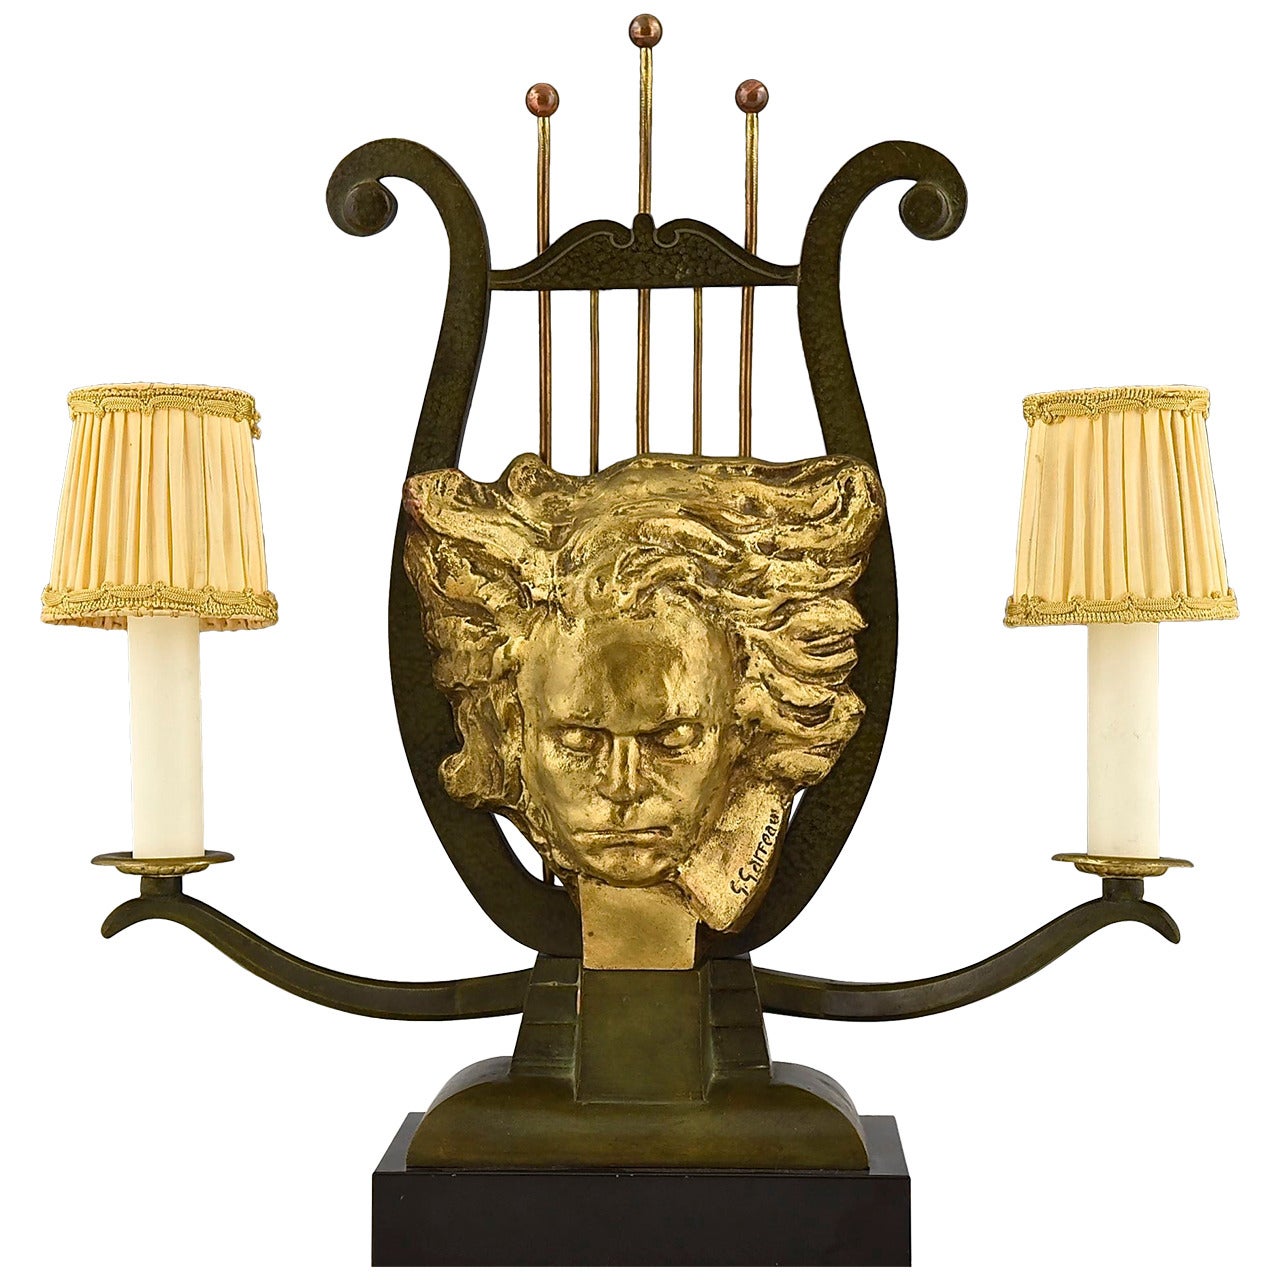 French Art Deco Bronze Lamp with Head of Beethoven by G. Garreau, 1935